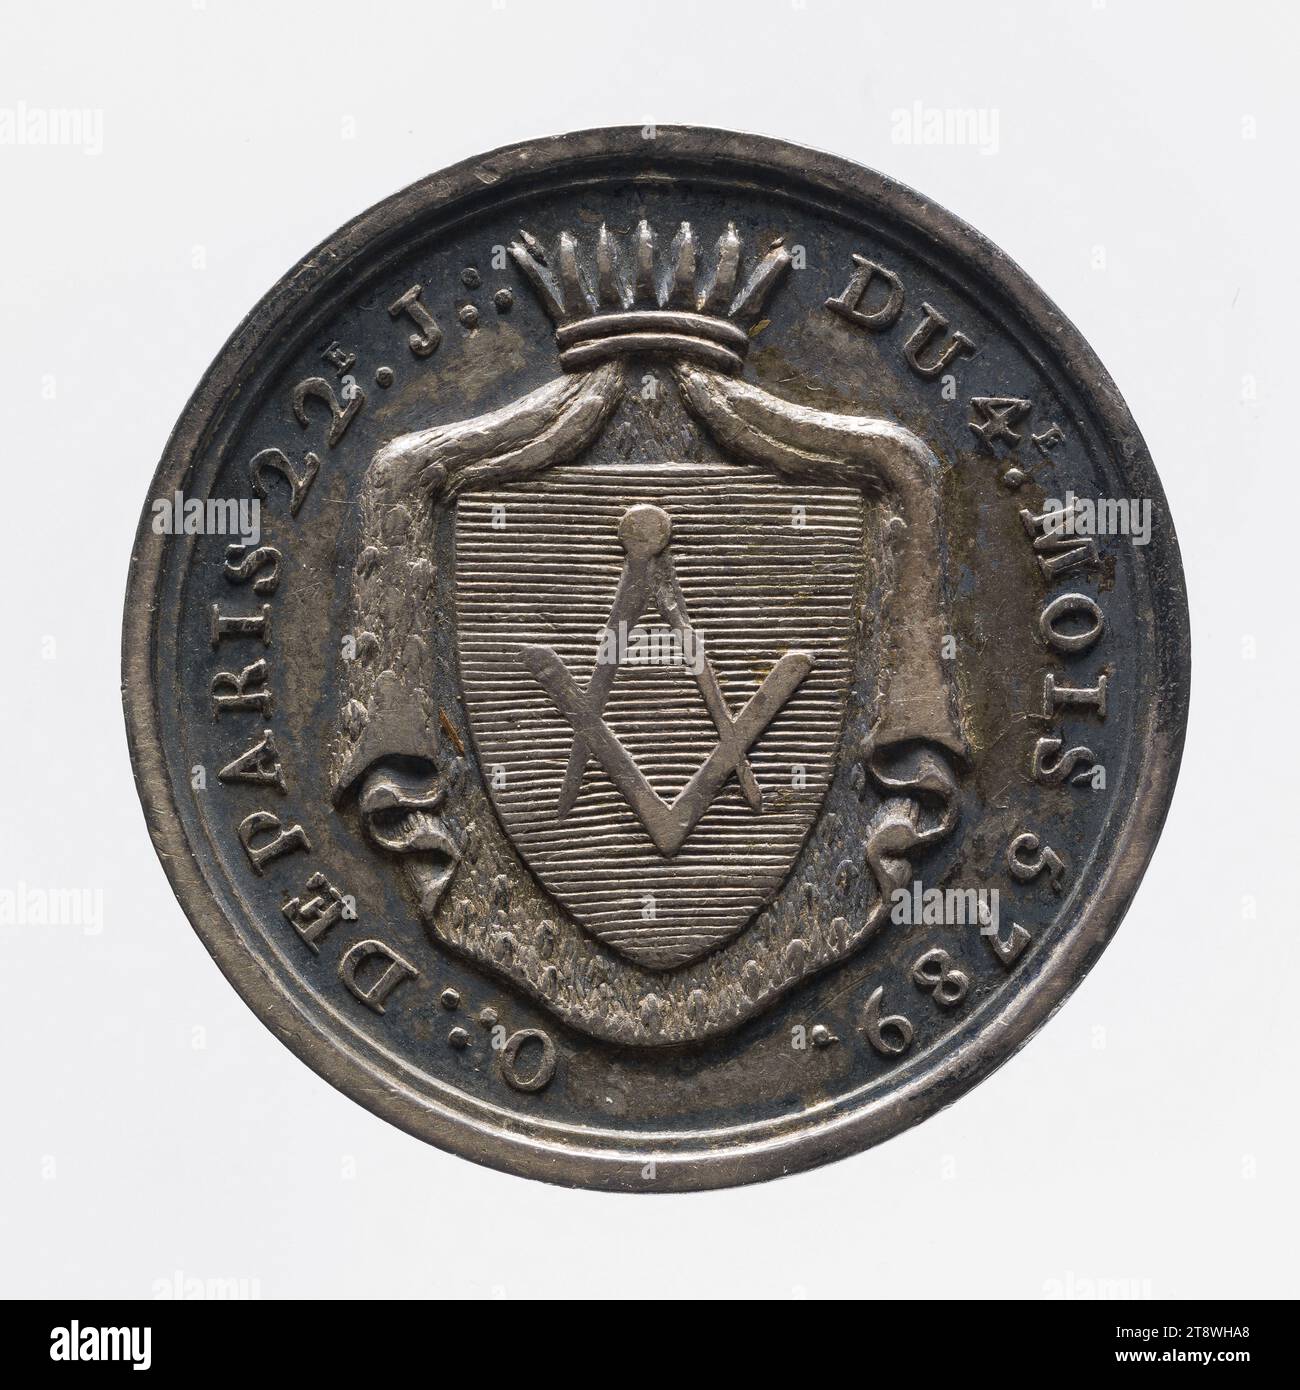 Masonic token, Friends of Peace Lodge, NAR, Medal engraver, In 1789, 4th quarter of the 18th century, Numismatic, Token (numismatic), Pewter, Dimensions - Worked: Diameter: 2.9 cm, Weight (type dimension): 8.5 g Stock Photo